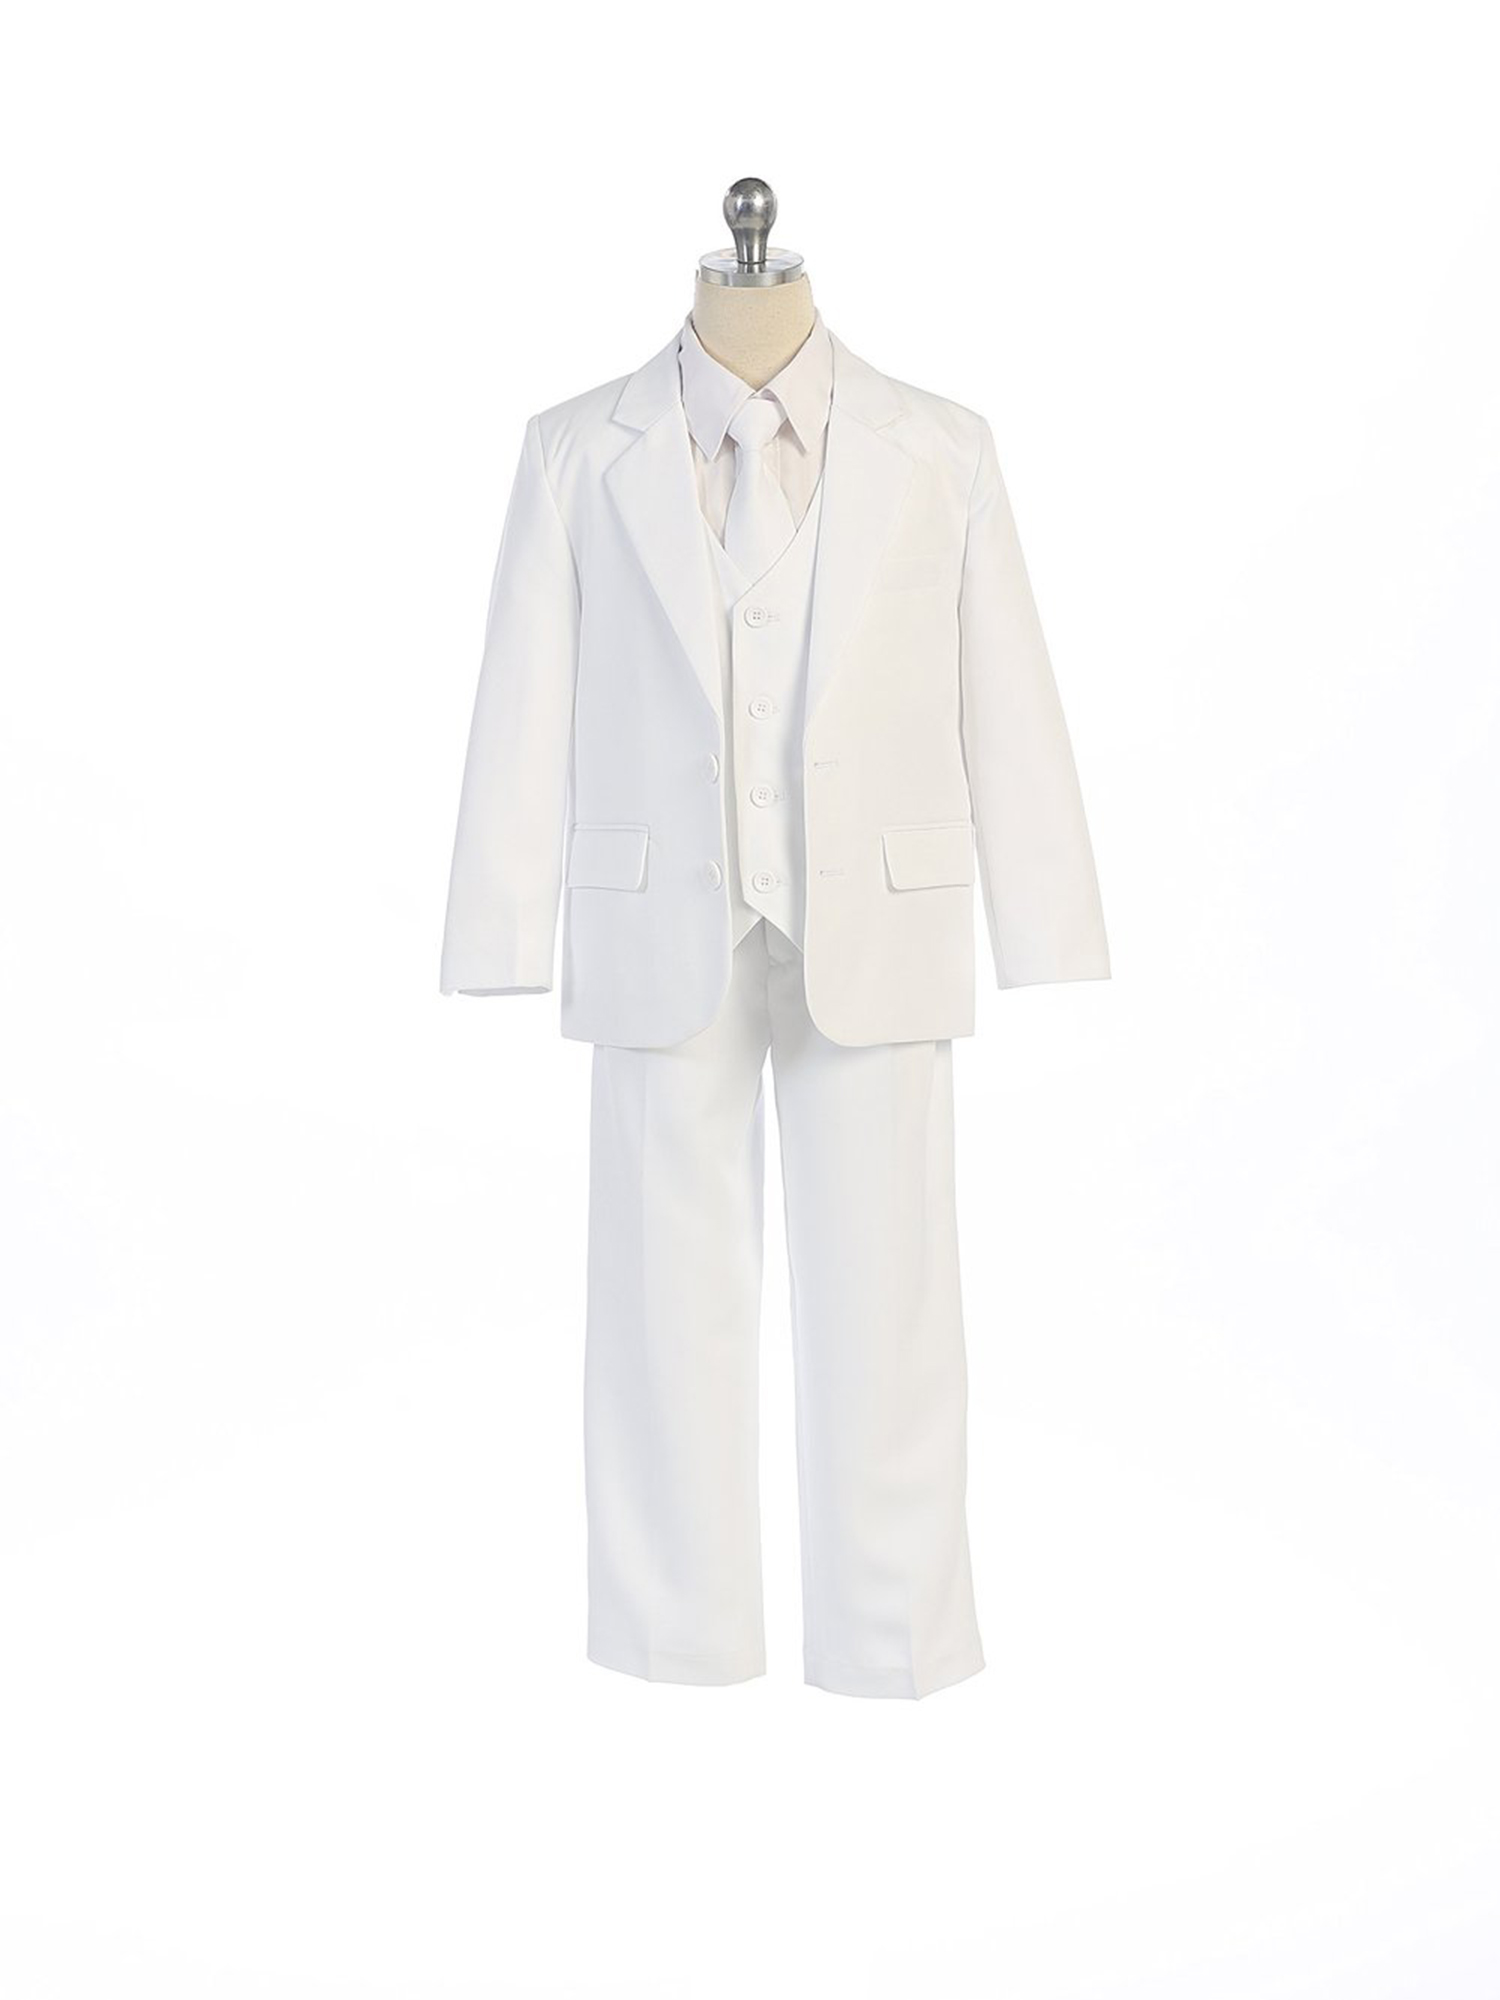 COLE Boys Suit with Shirt and Vest (5-Piece) - White - Size 5